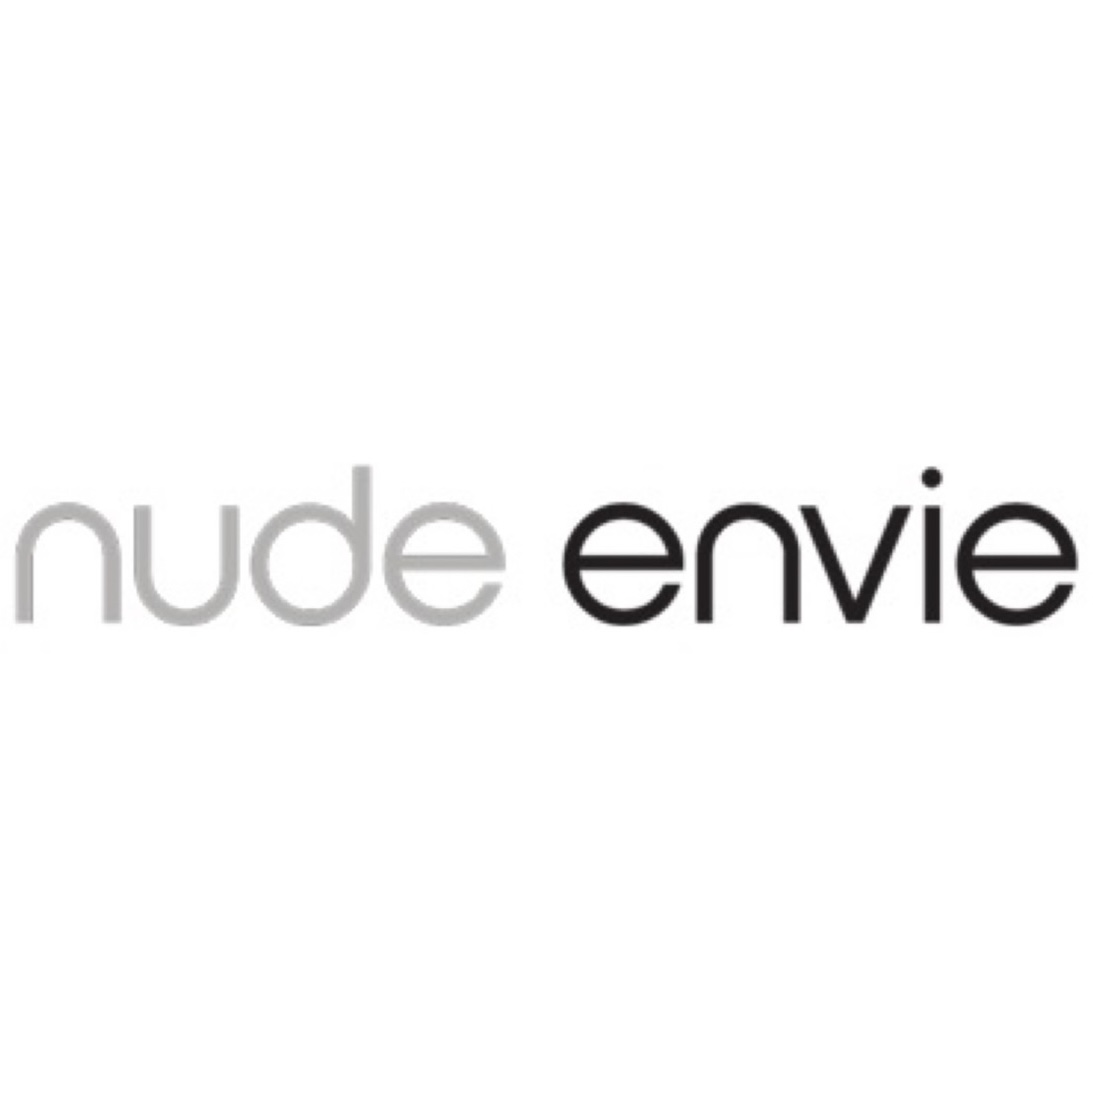 Nude Envie Coupons